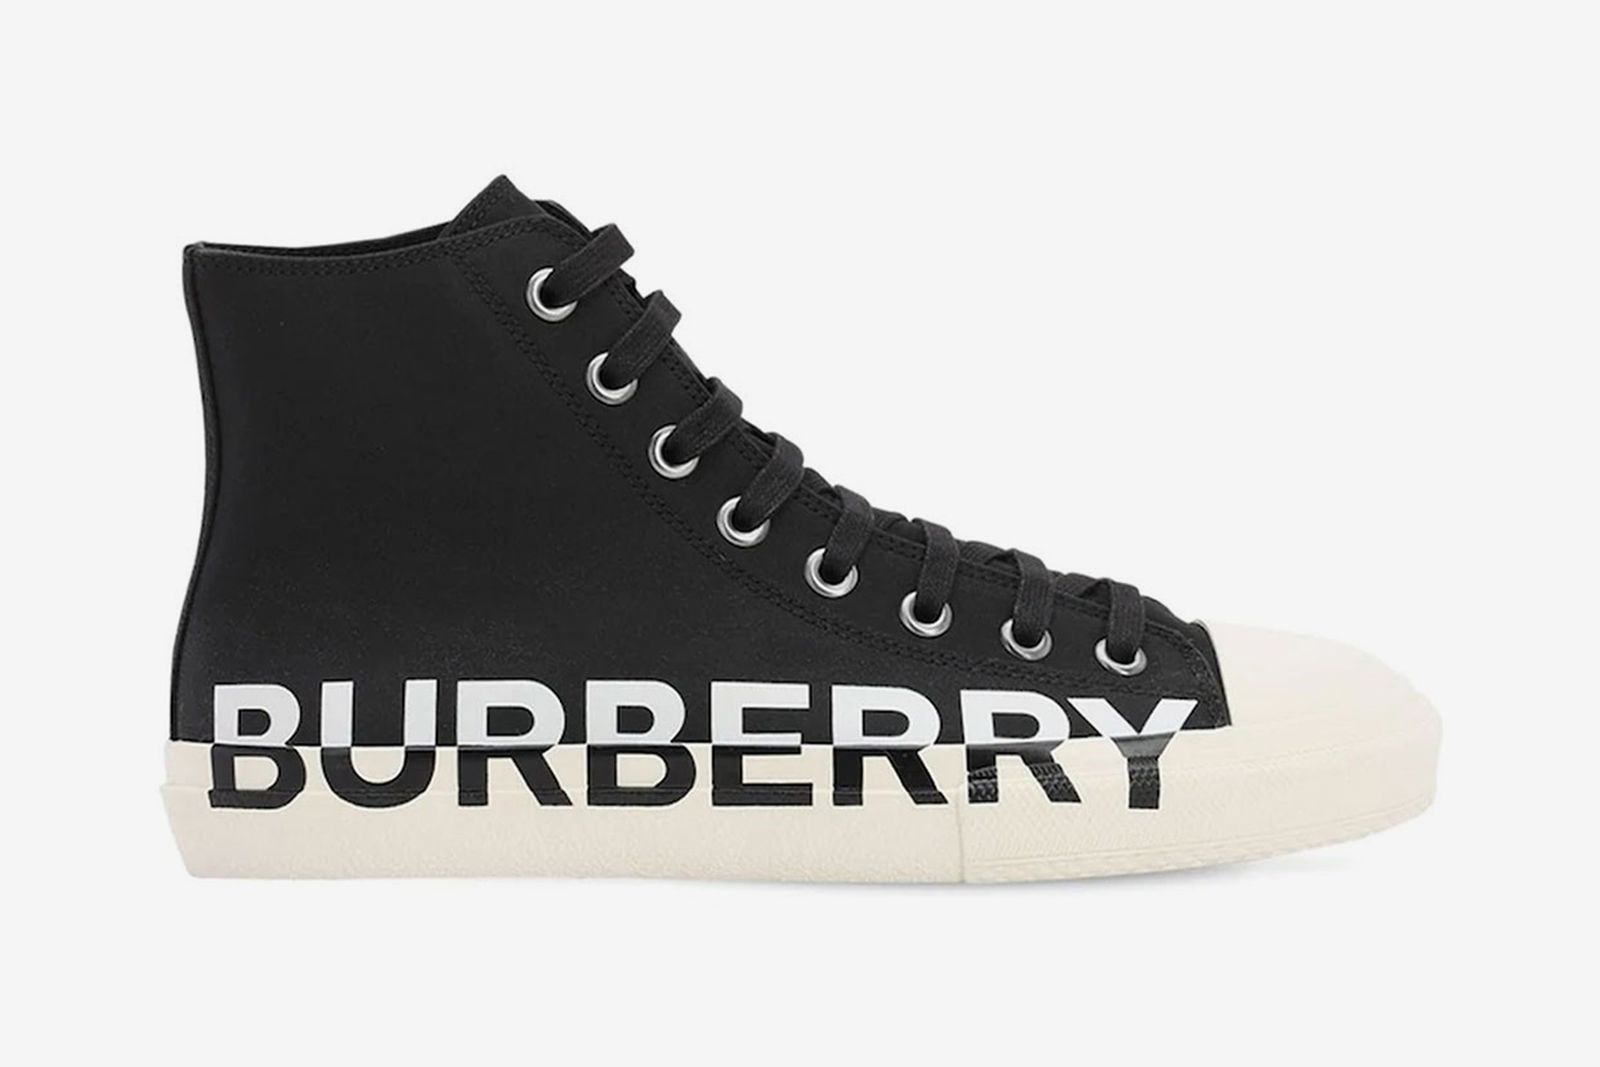 Burberry Just Dropped a New Canvas Sneaker: Shop It Here